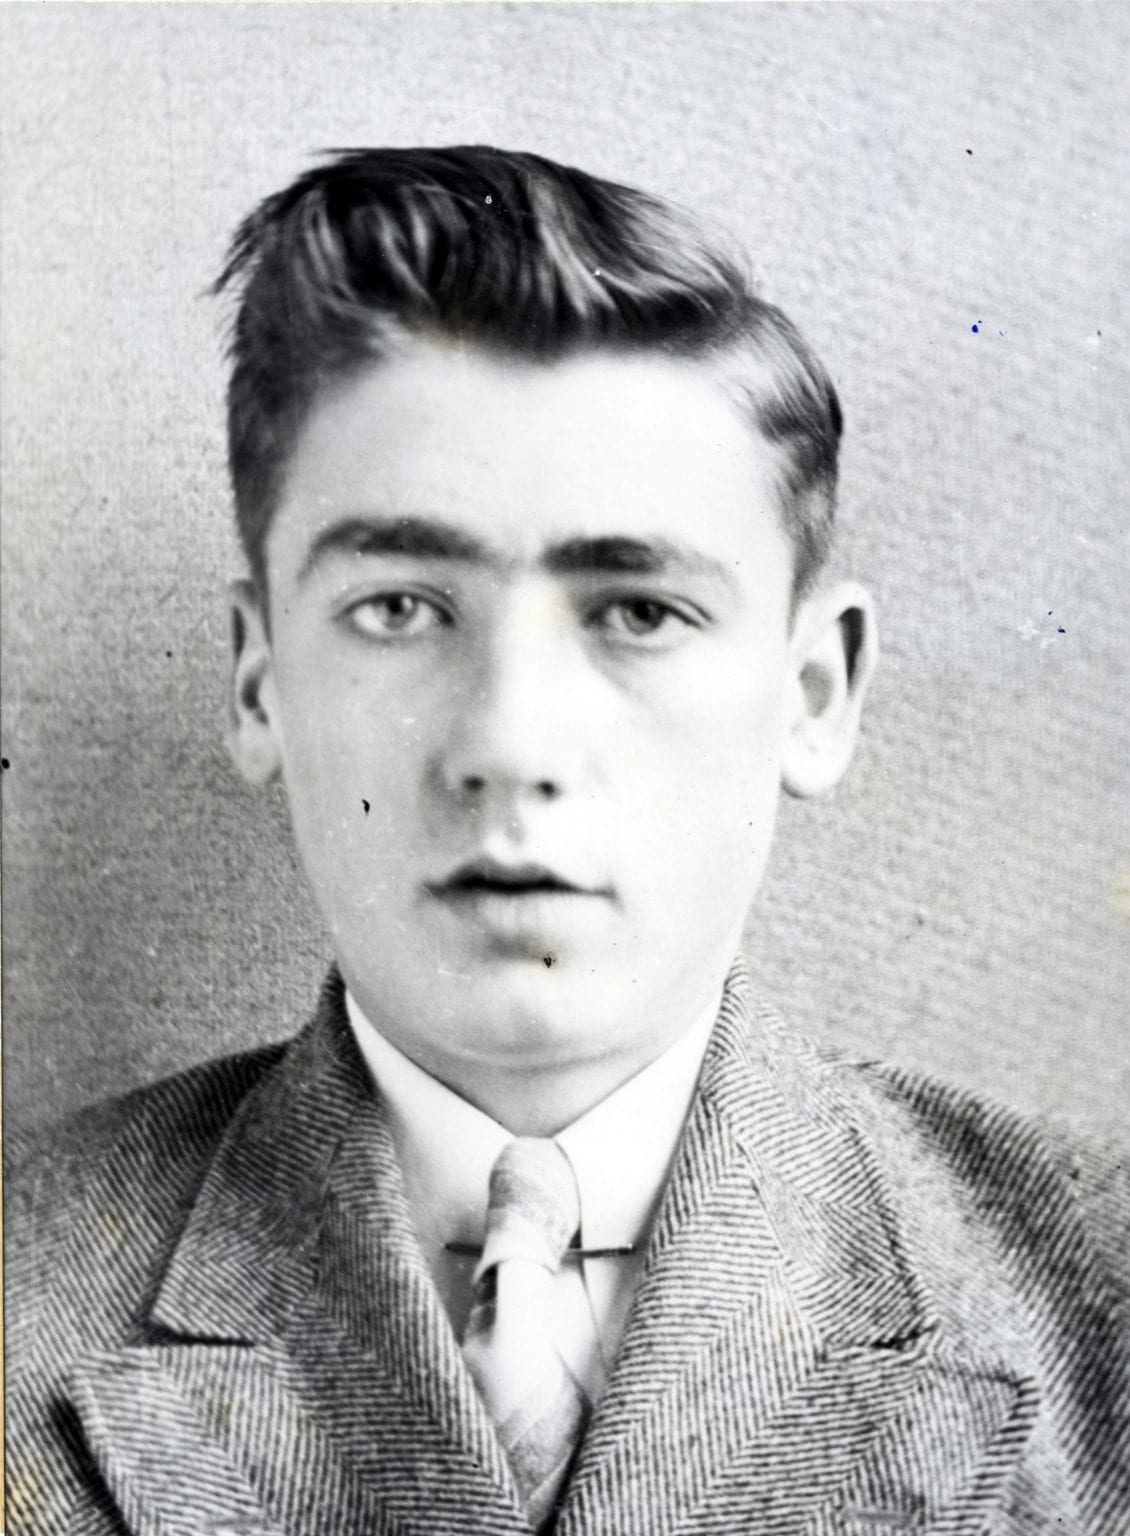 Photo of Robert Lytle dressed in a suit and tie.